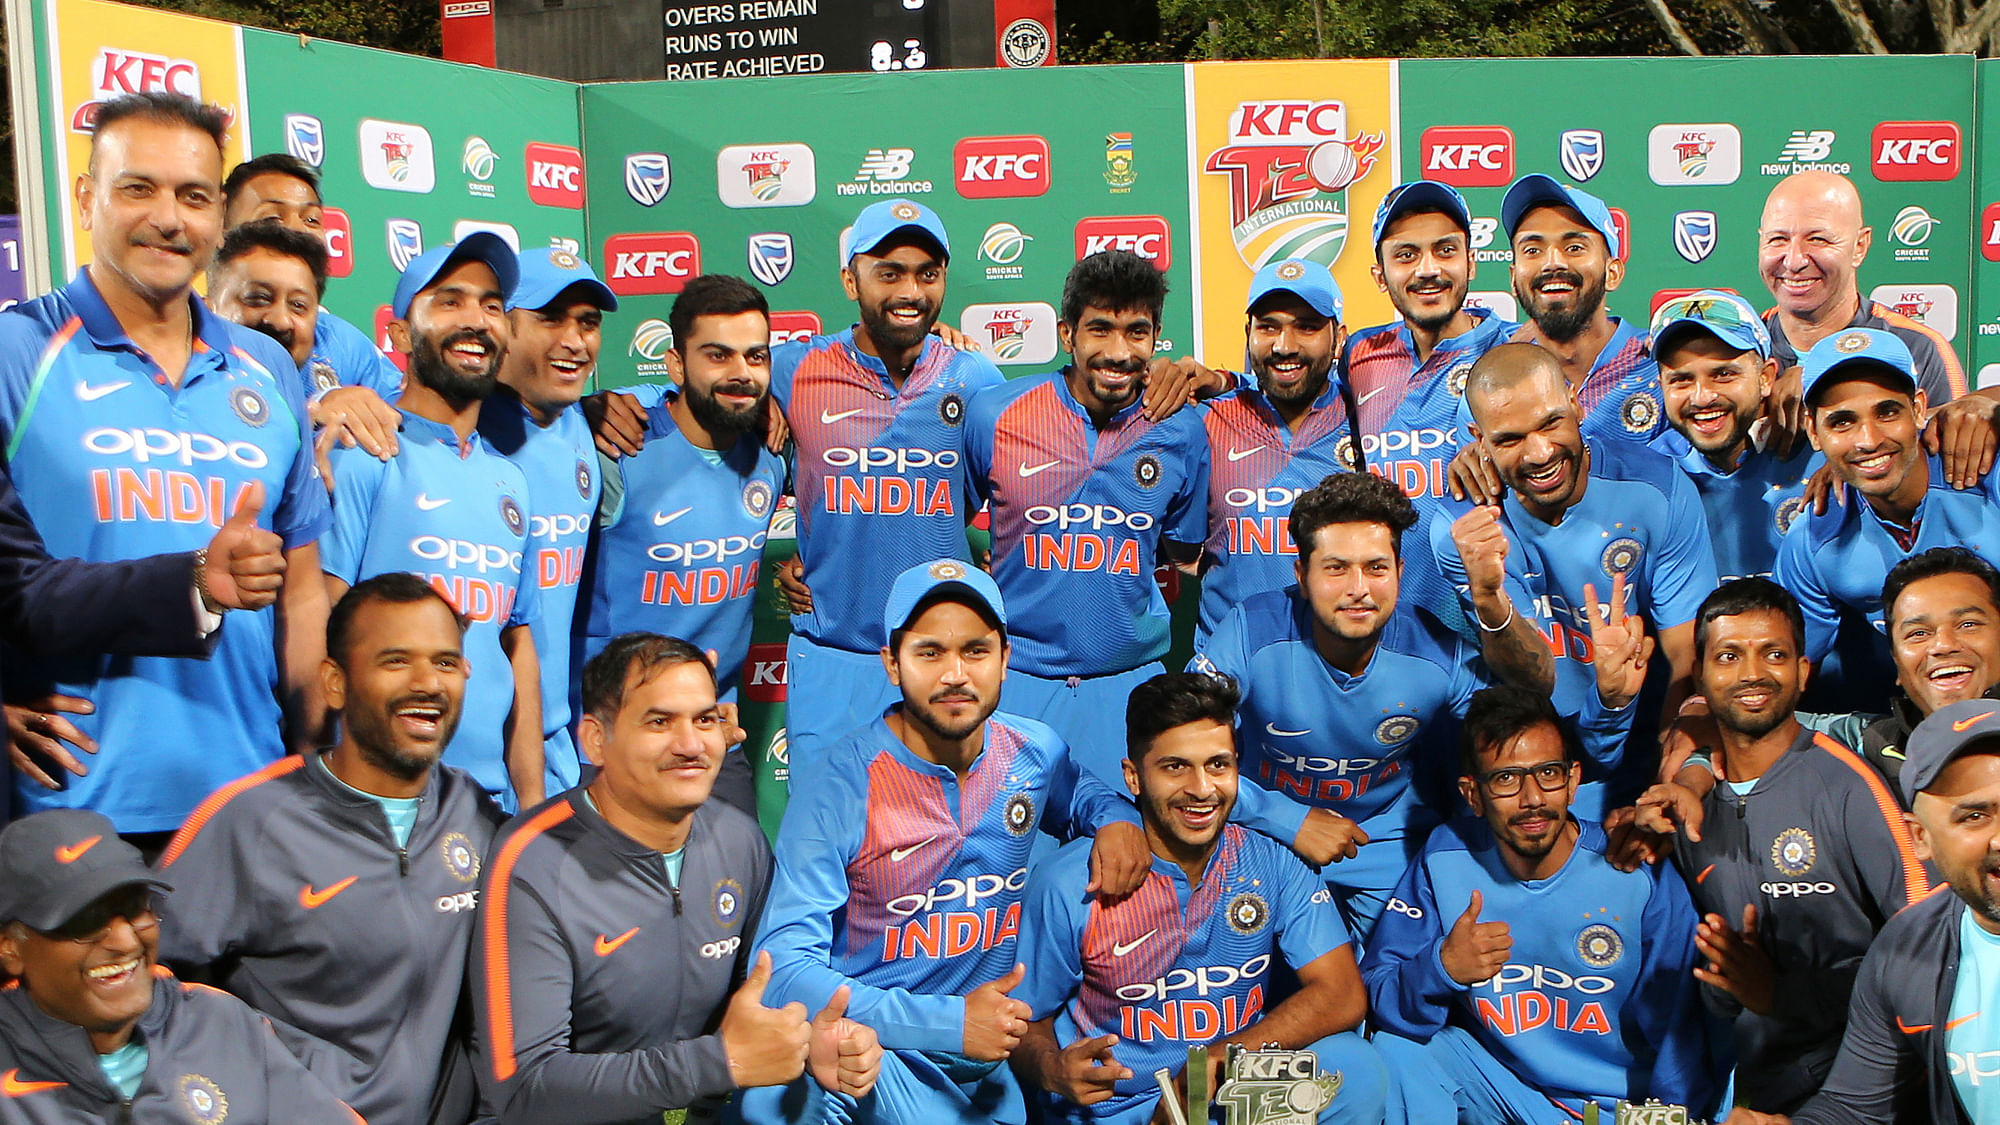 India defeated South Africa in the third and final T20 by 7 runs.